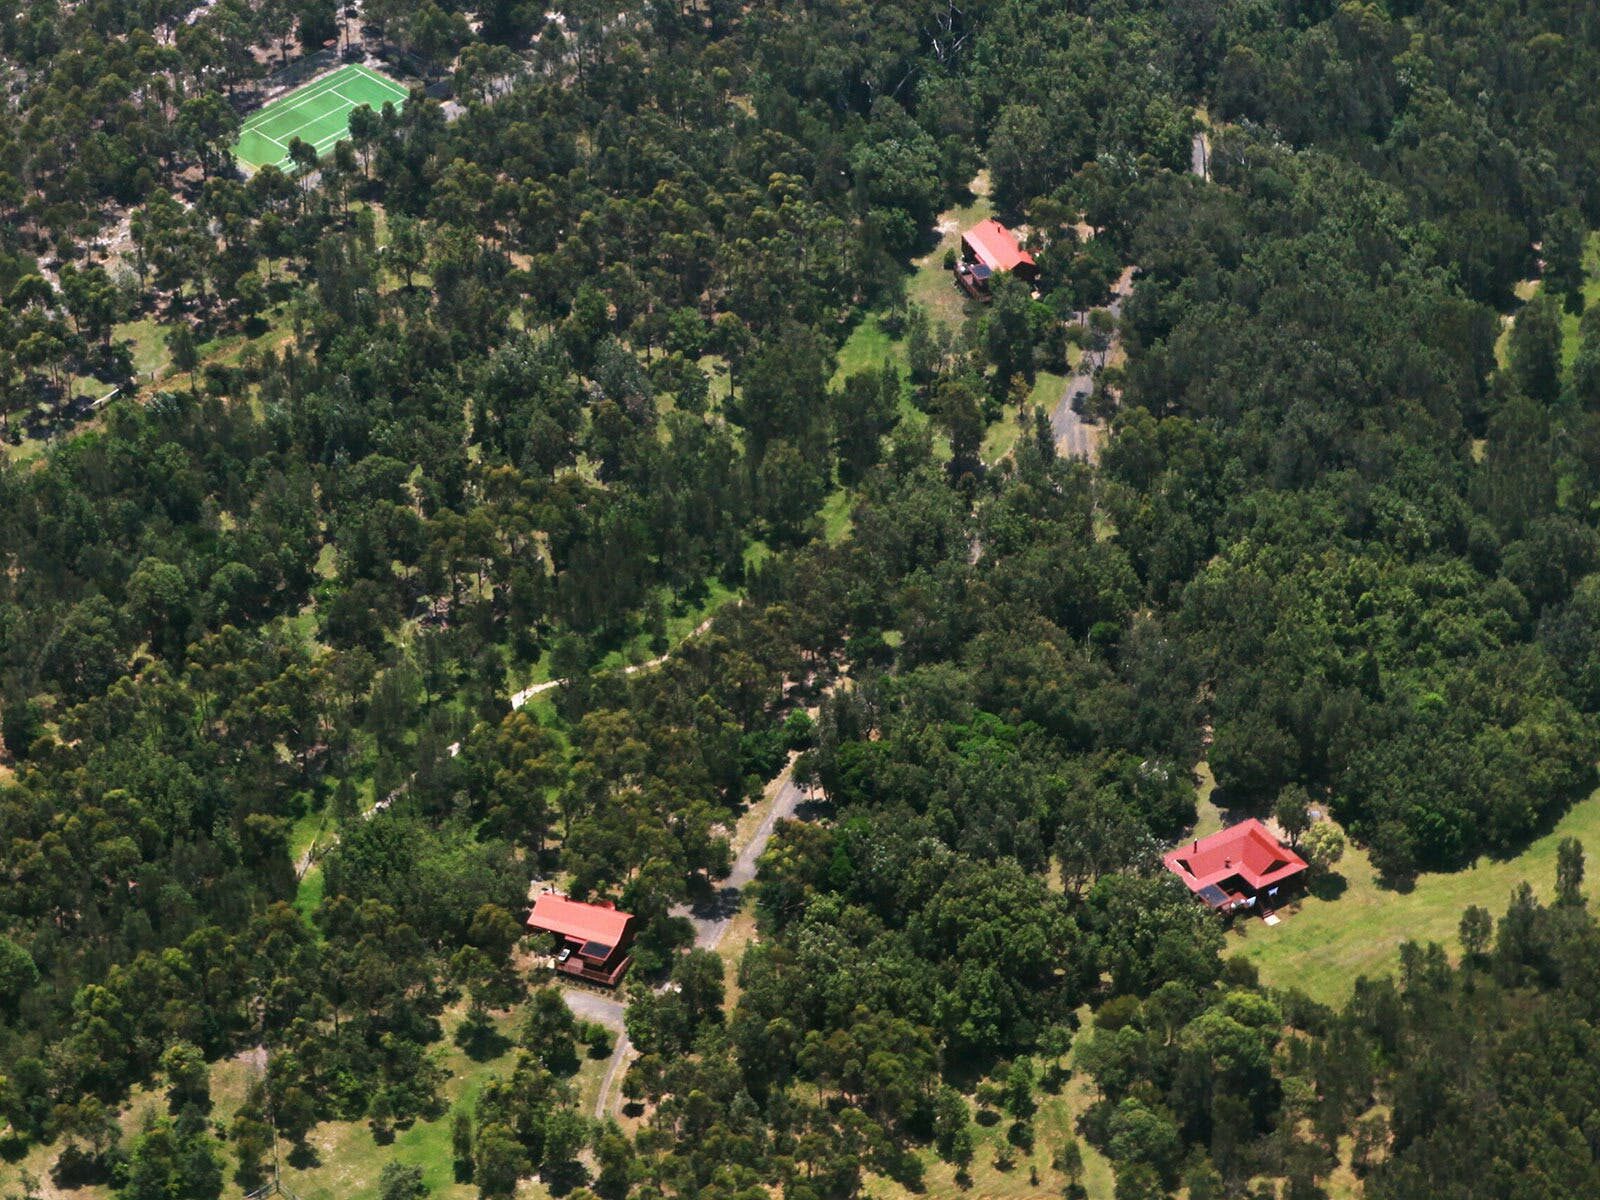 Melaleuca Seaside Retreat - Aerial view of forest, cottages and Tennis/Basketball court.